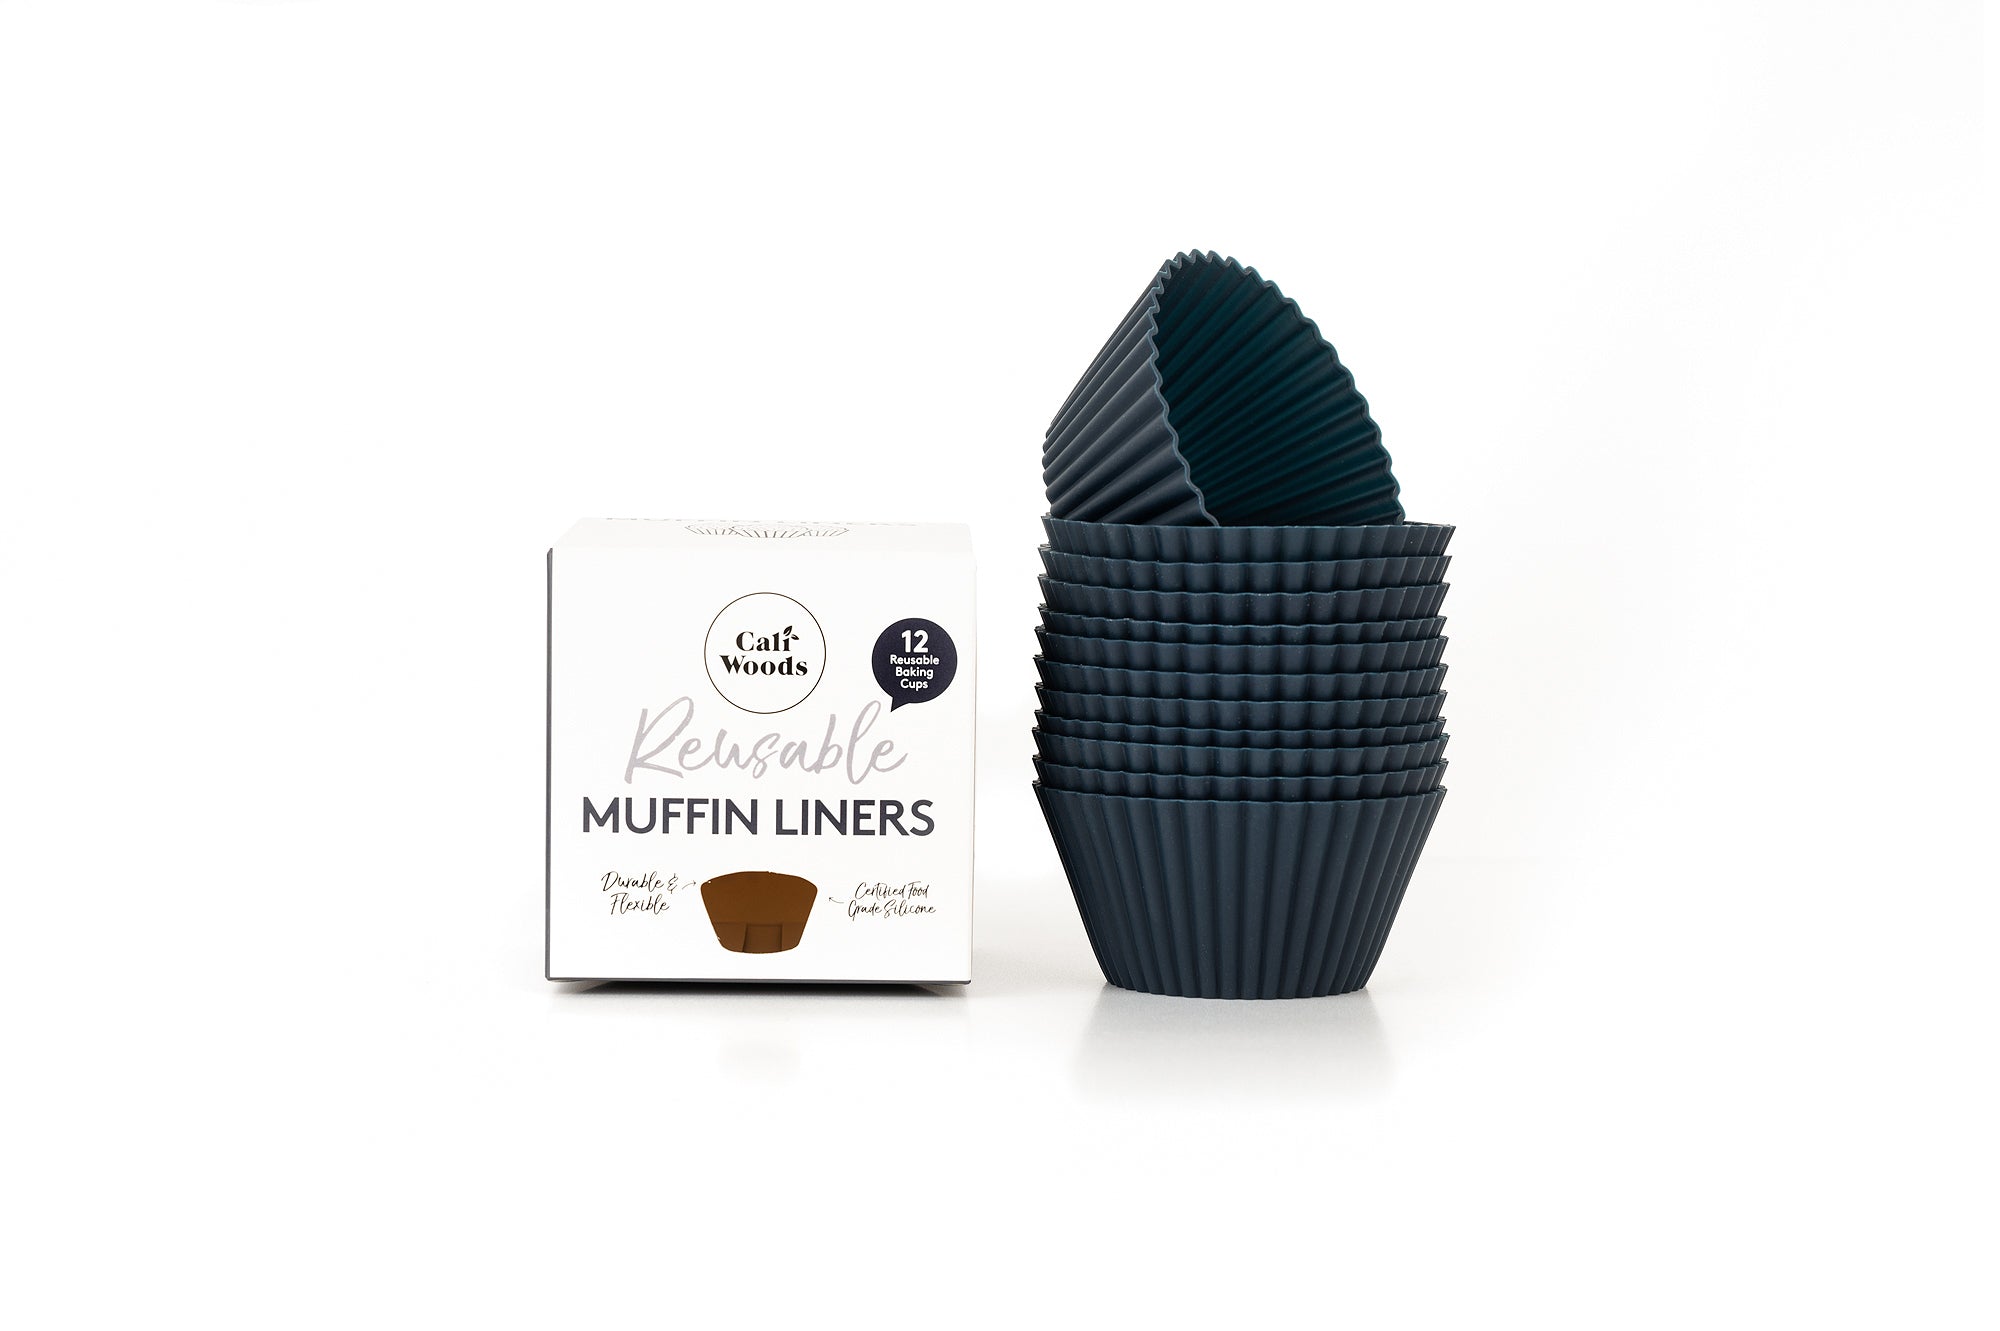 Caliwoods Silicone Muffin Liners